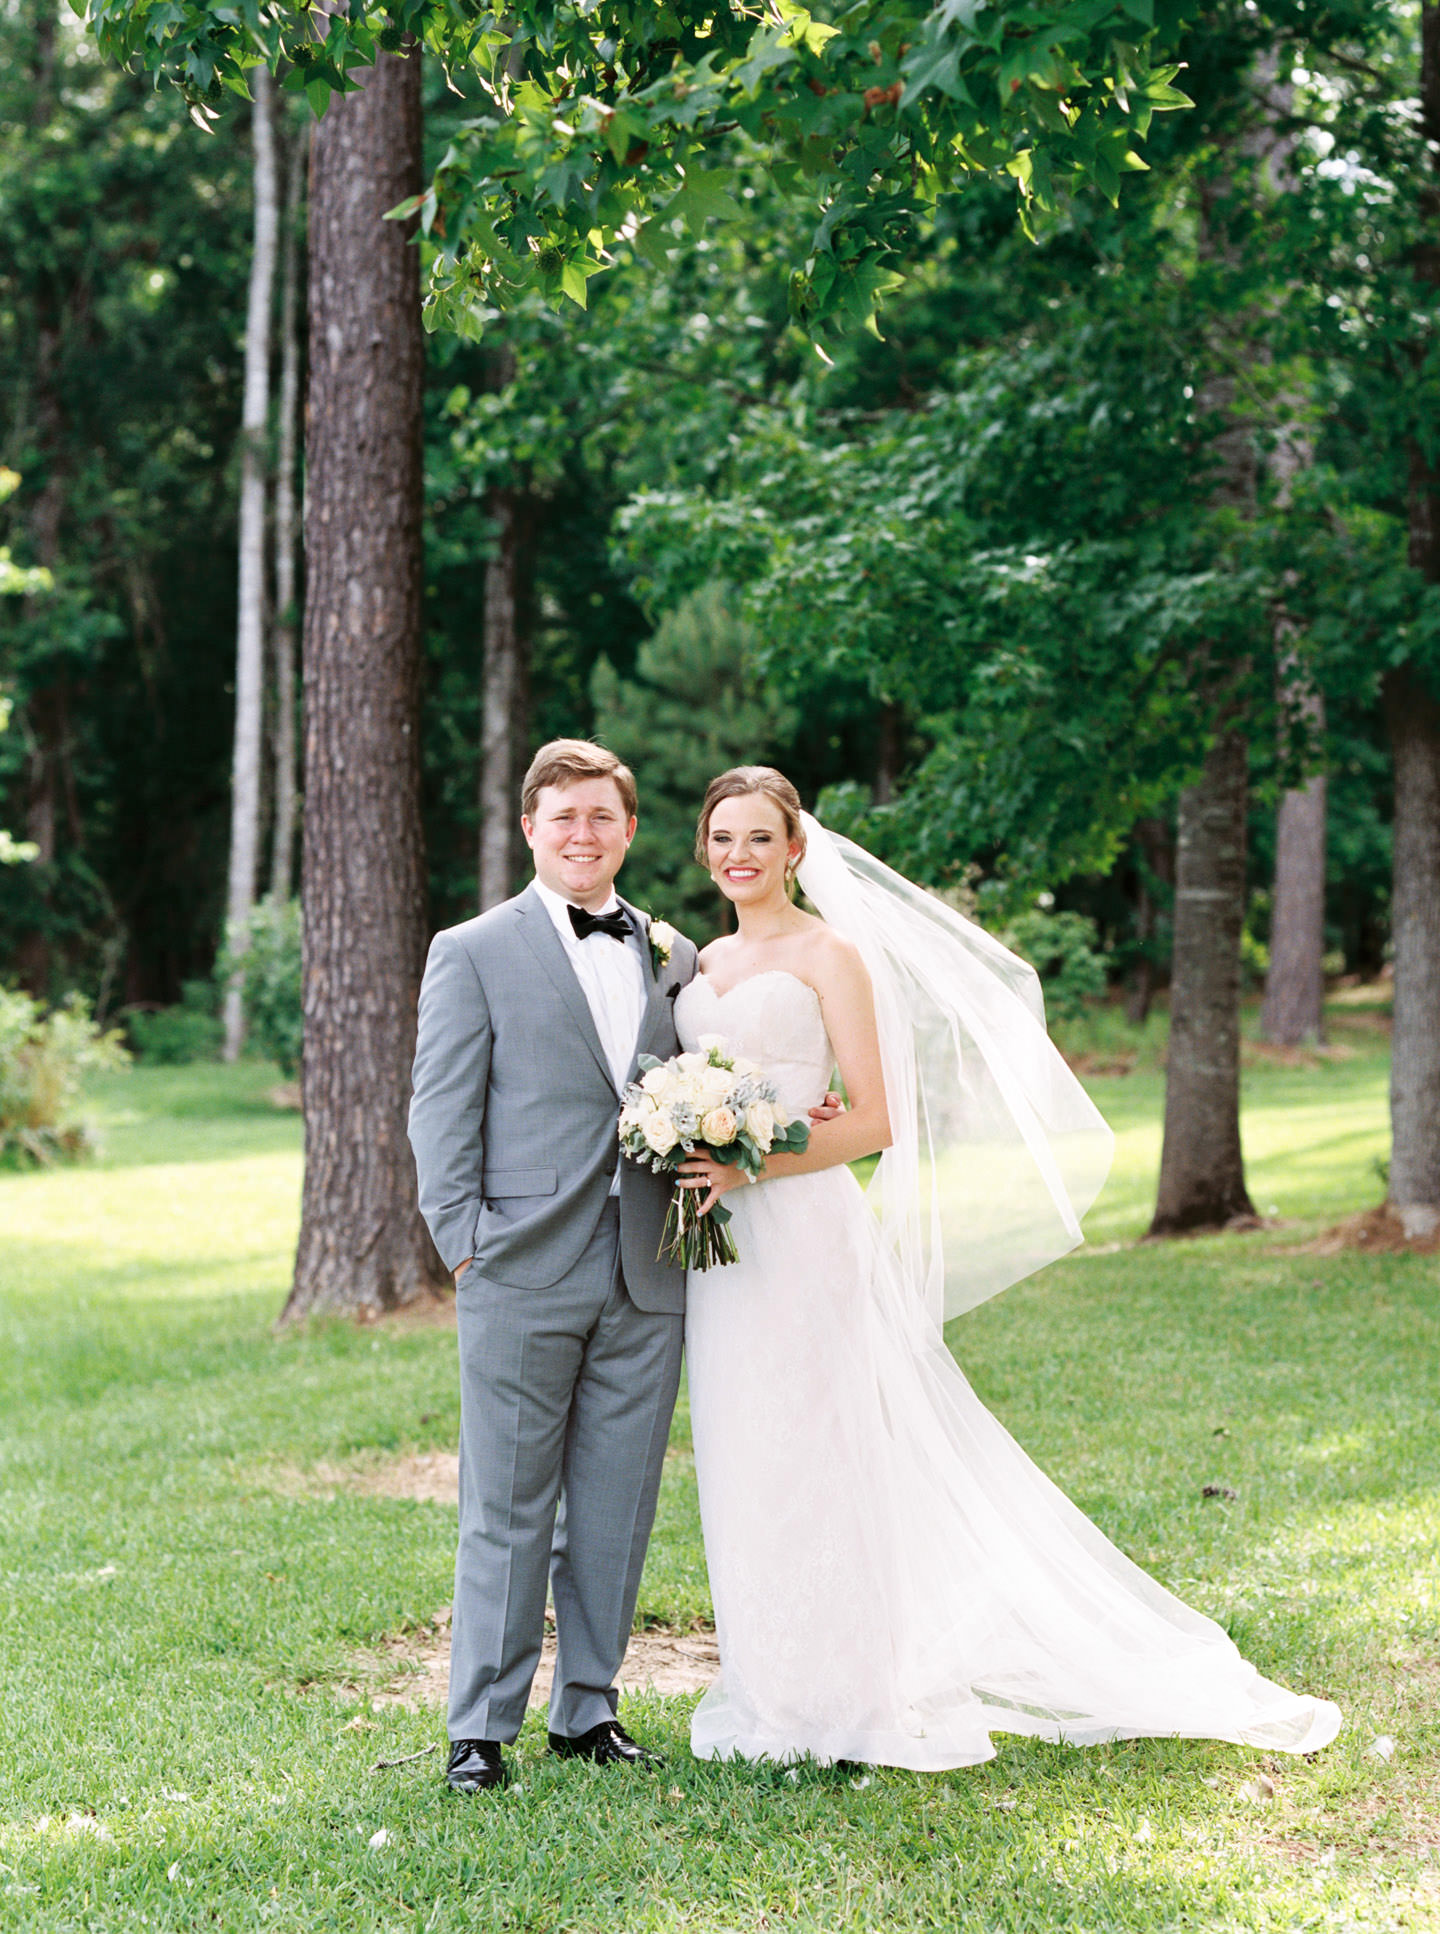 Mississippi Bride and Groom smile for an outdoor film portrait for fine art wedding photographer Ashley Schurch